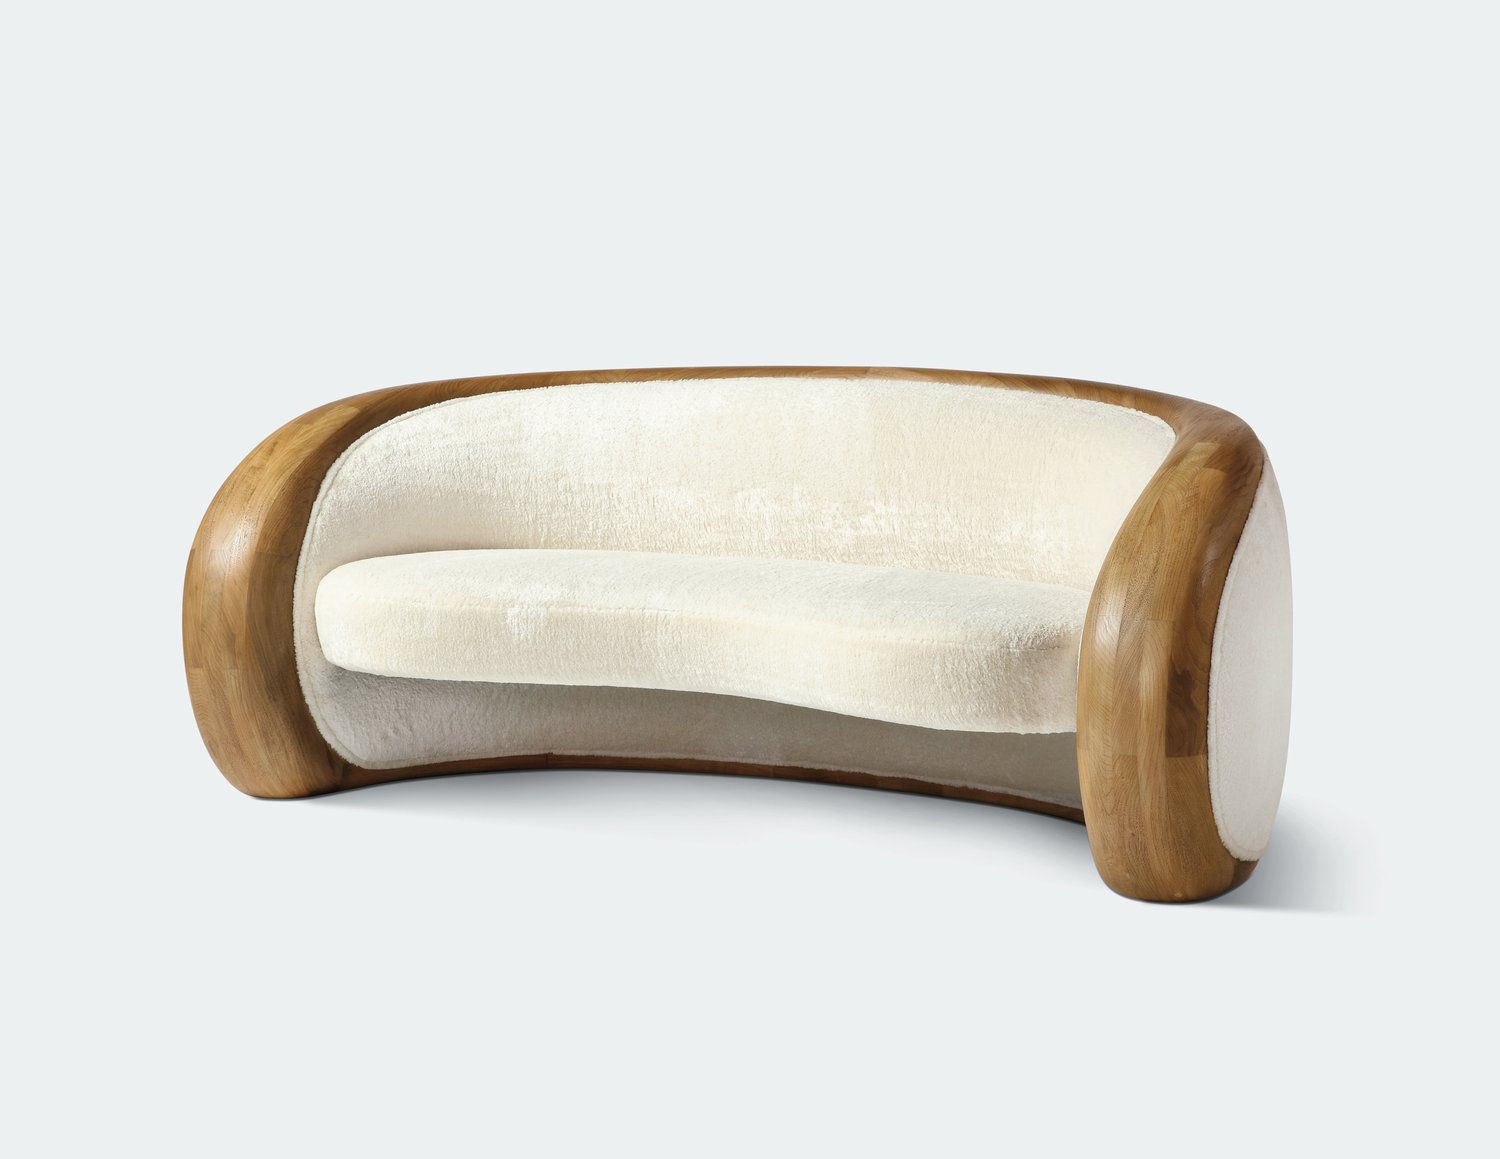 Small curved couch with outline in polished wood.